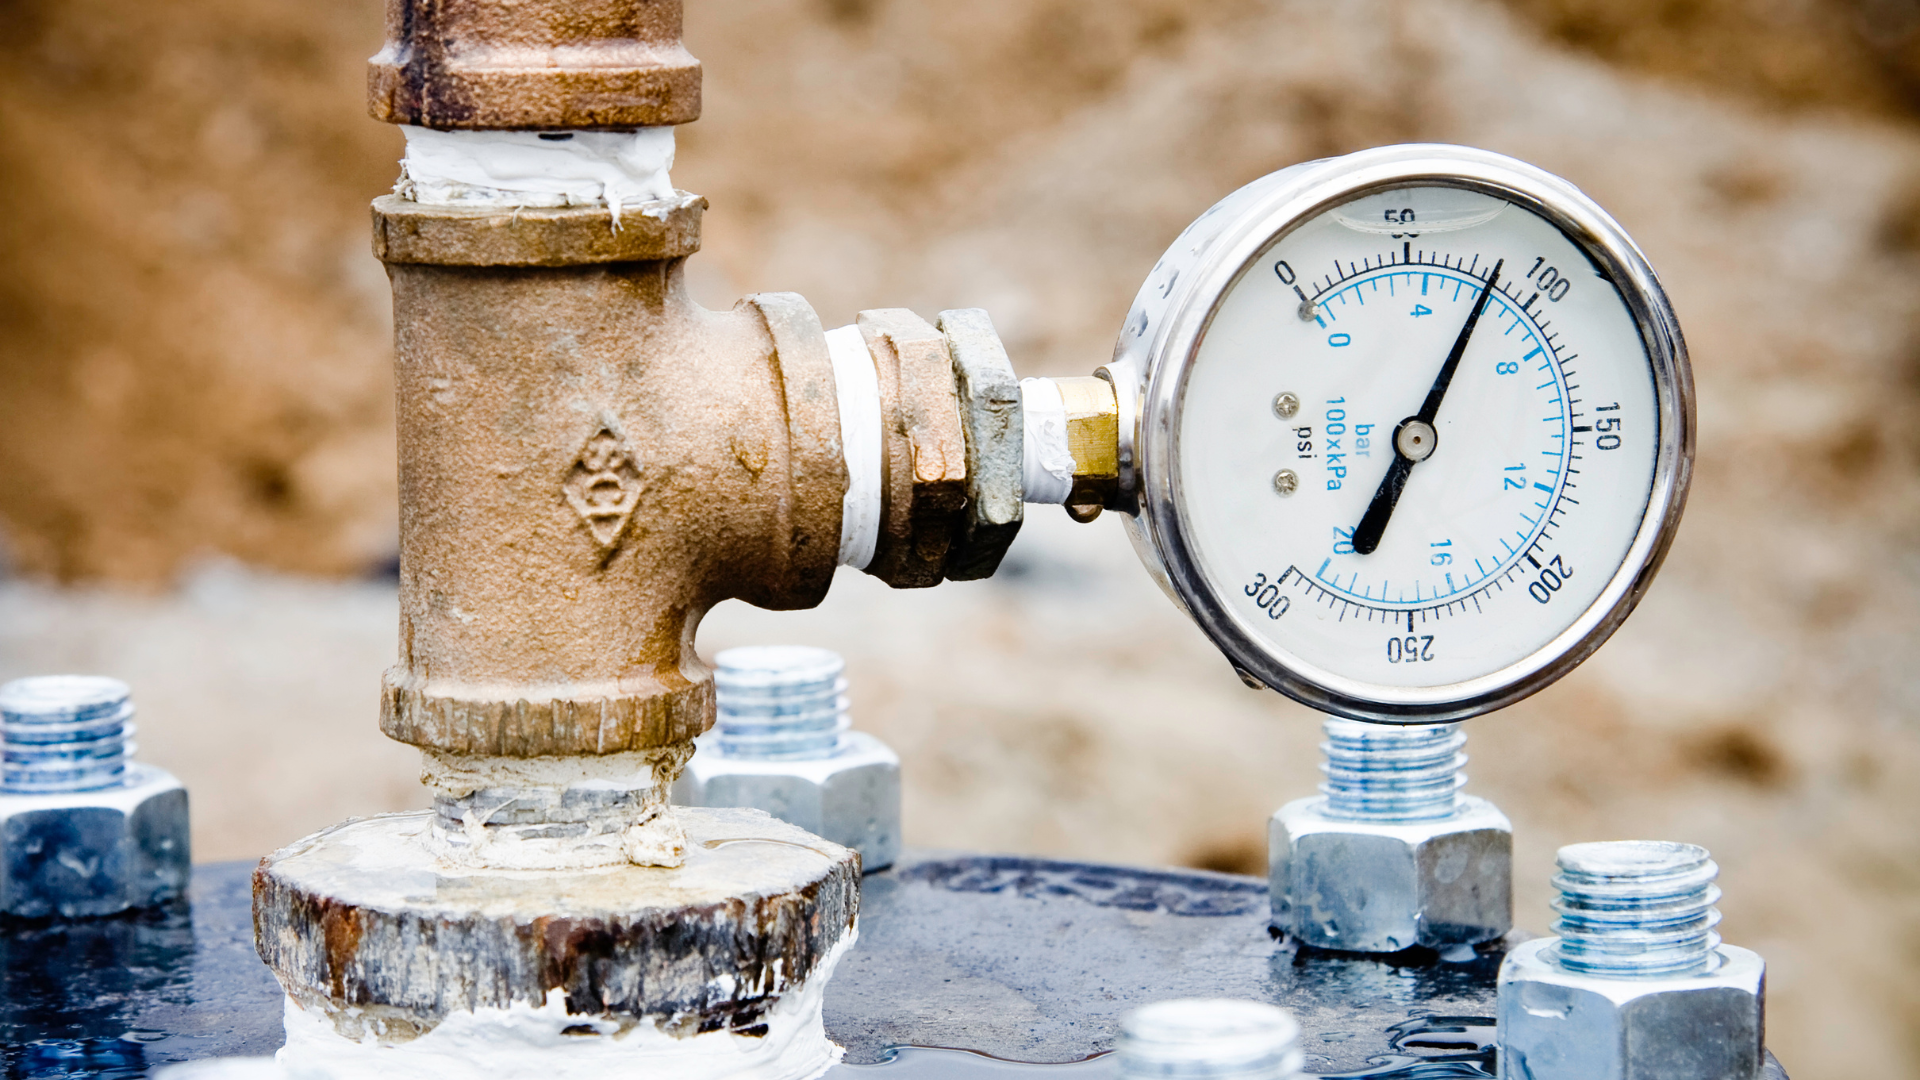 Explore the common reasons for low water pressure and discover how you can prevent them with Cornel's Plumbing!